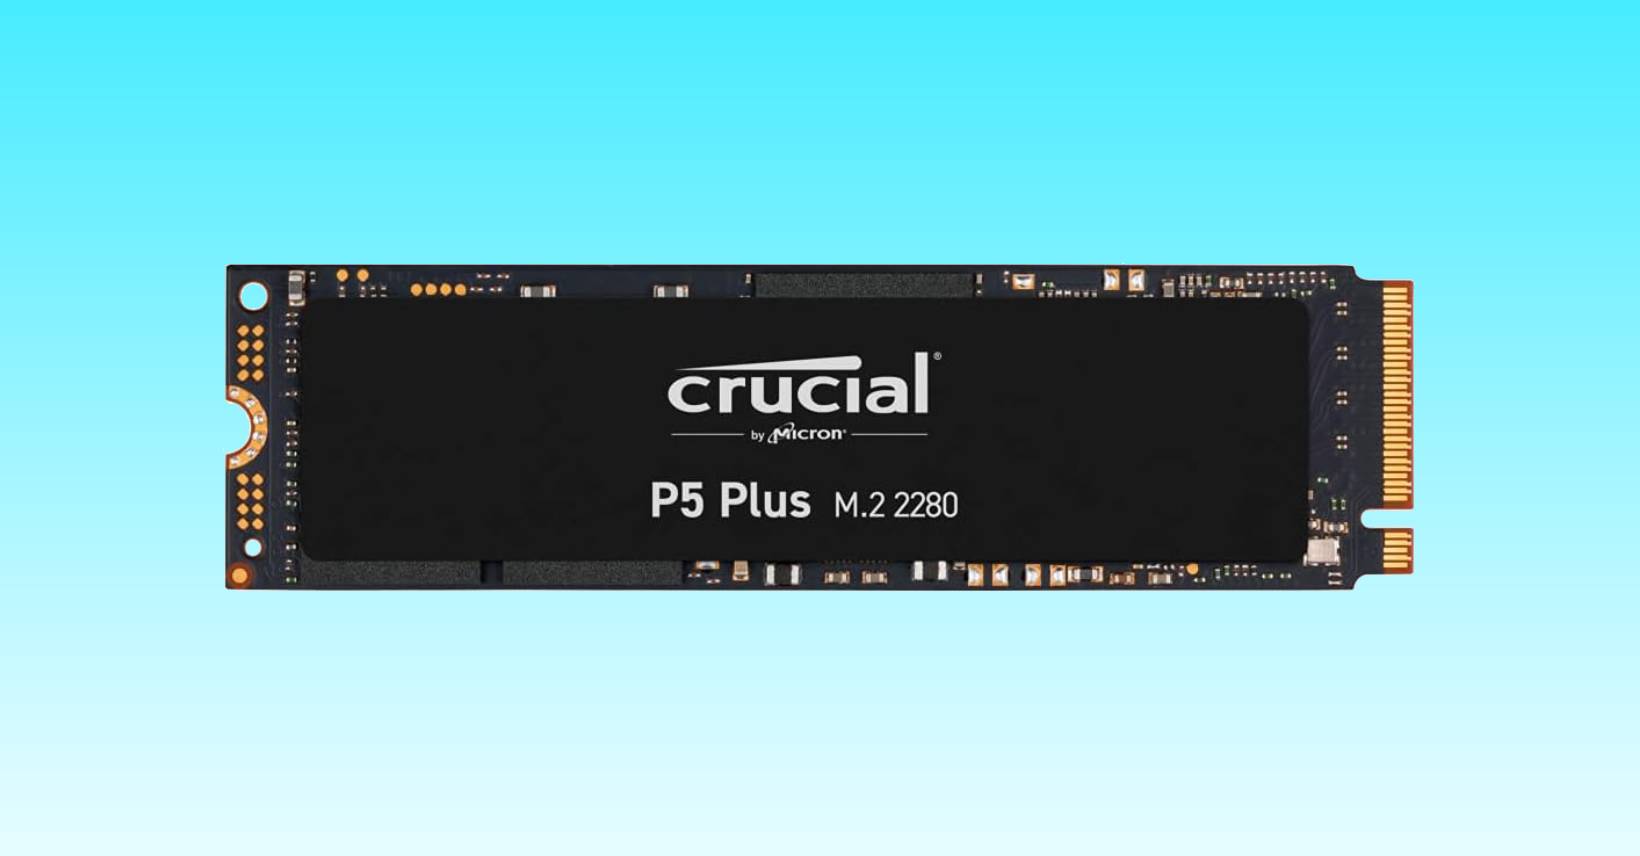 This Crucial P5 Plus Gaming NVMe SSD just got its price slashed by